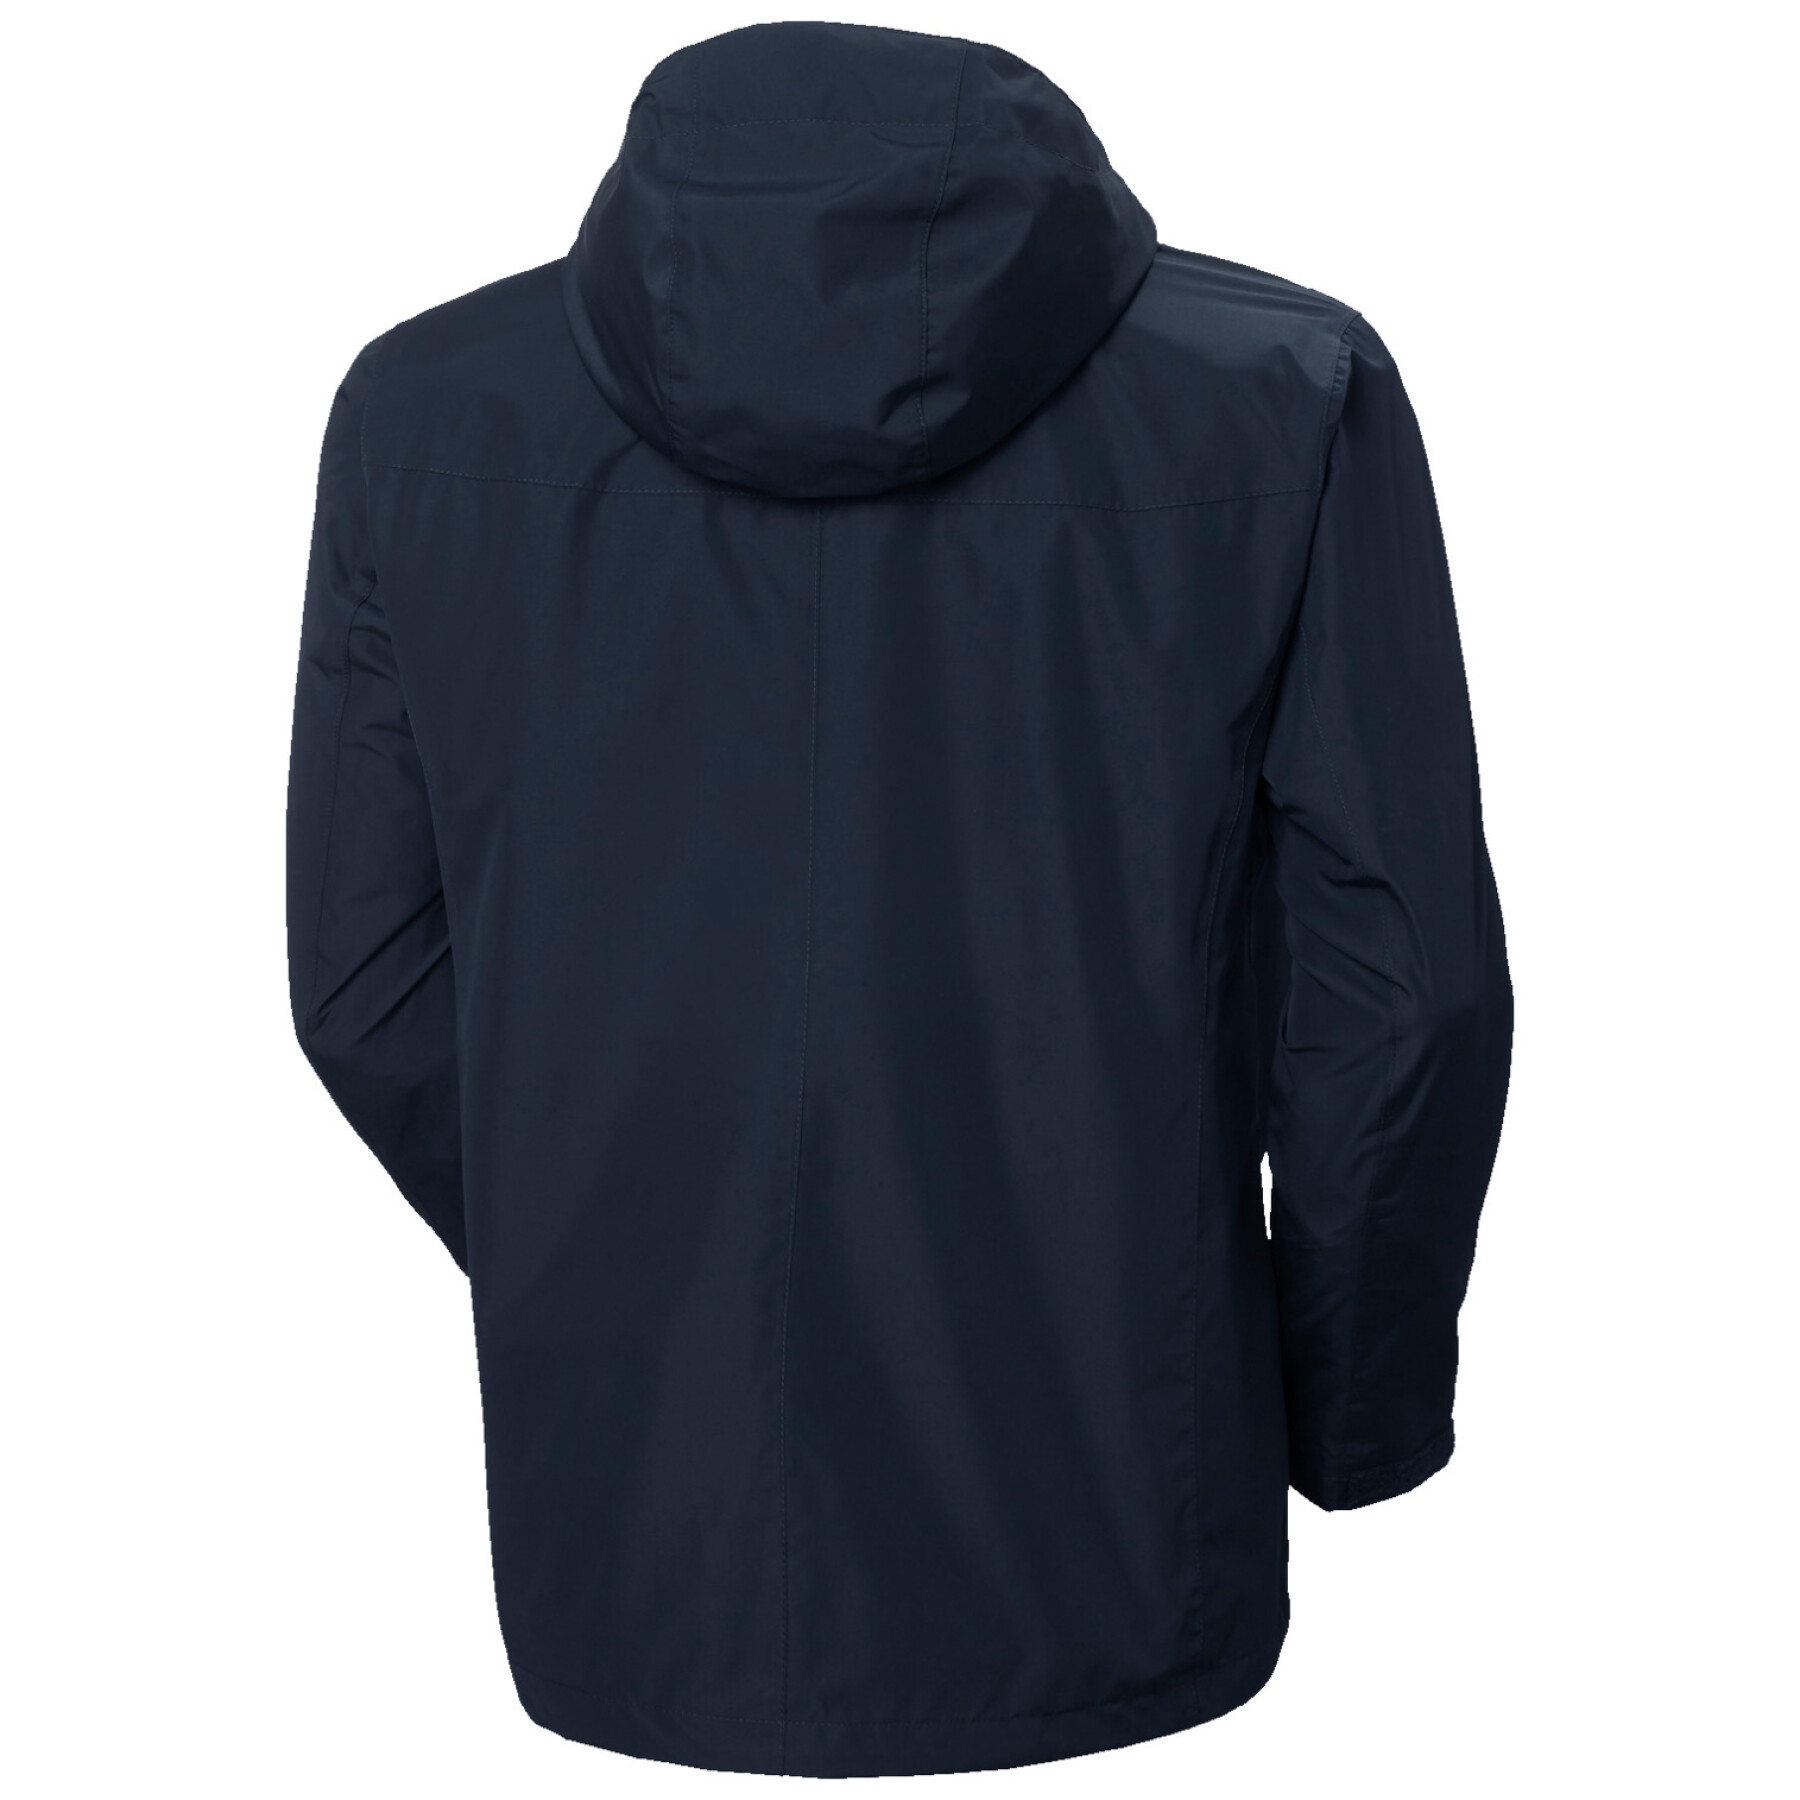 Chaqueta impermeable mujer Helly Hansen Seven J Plus